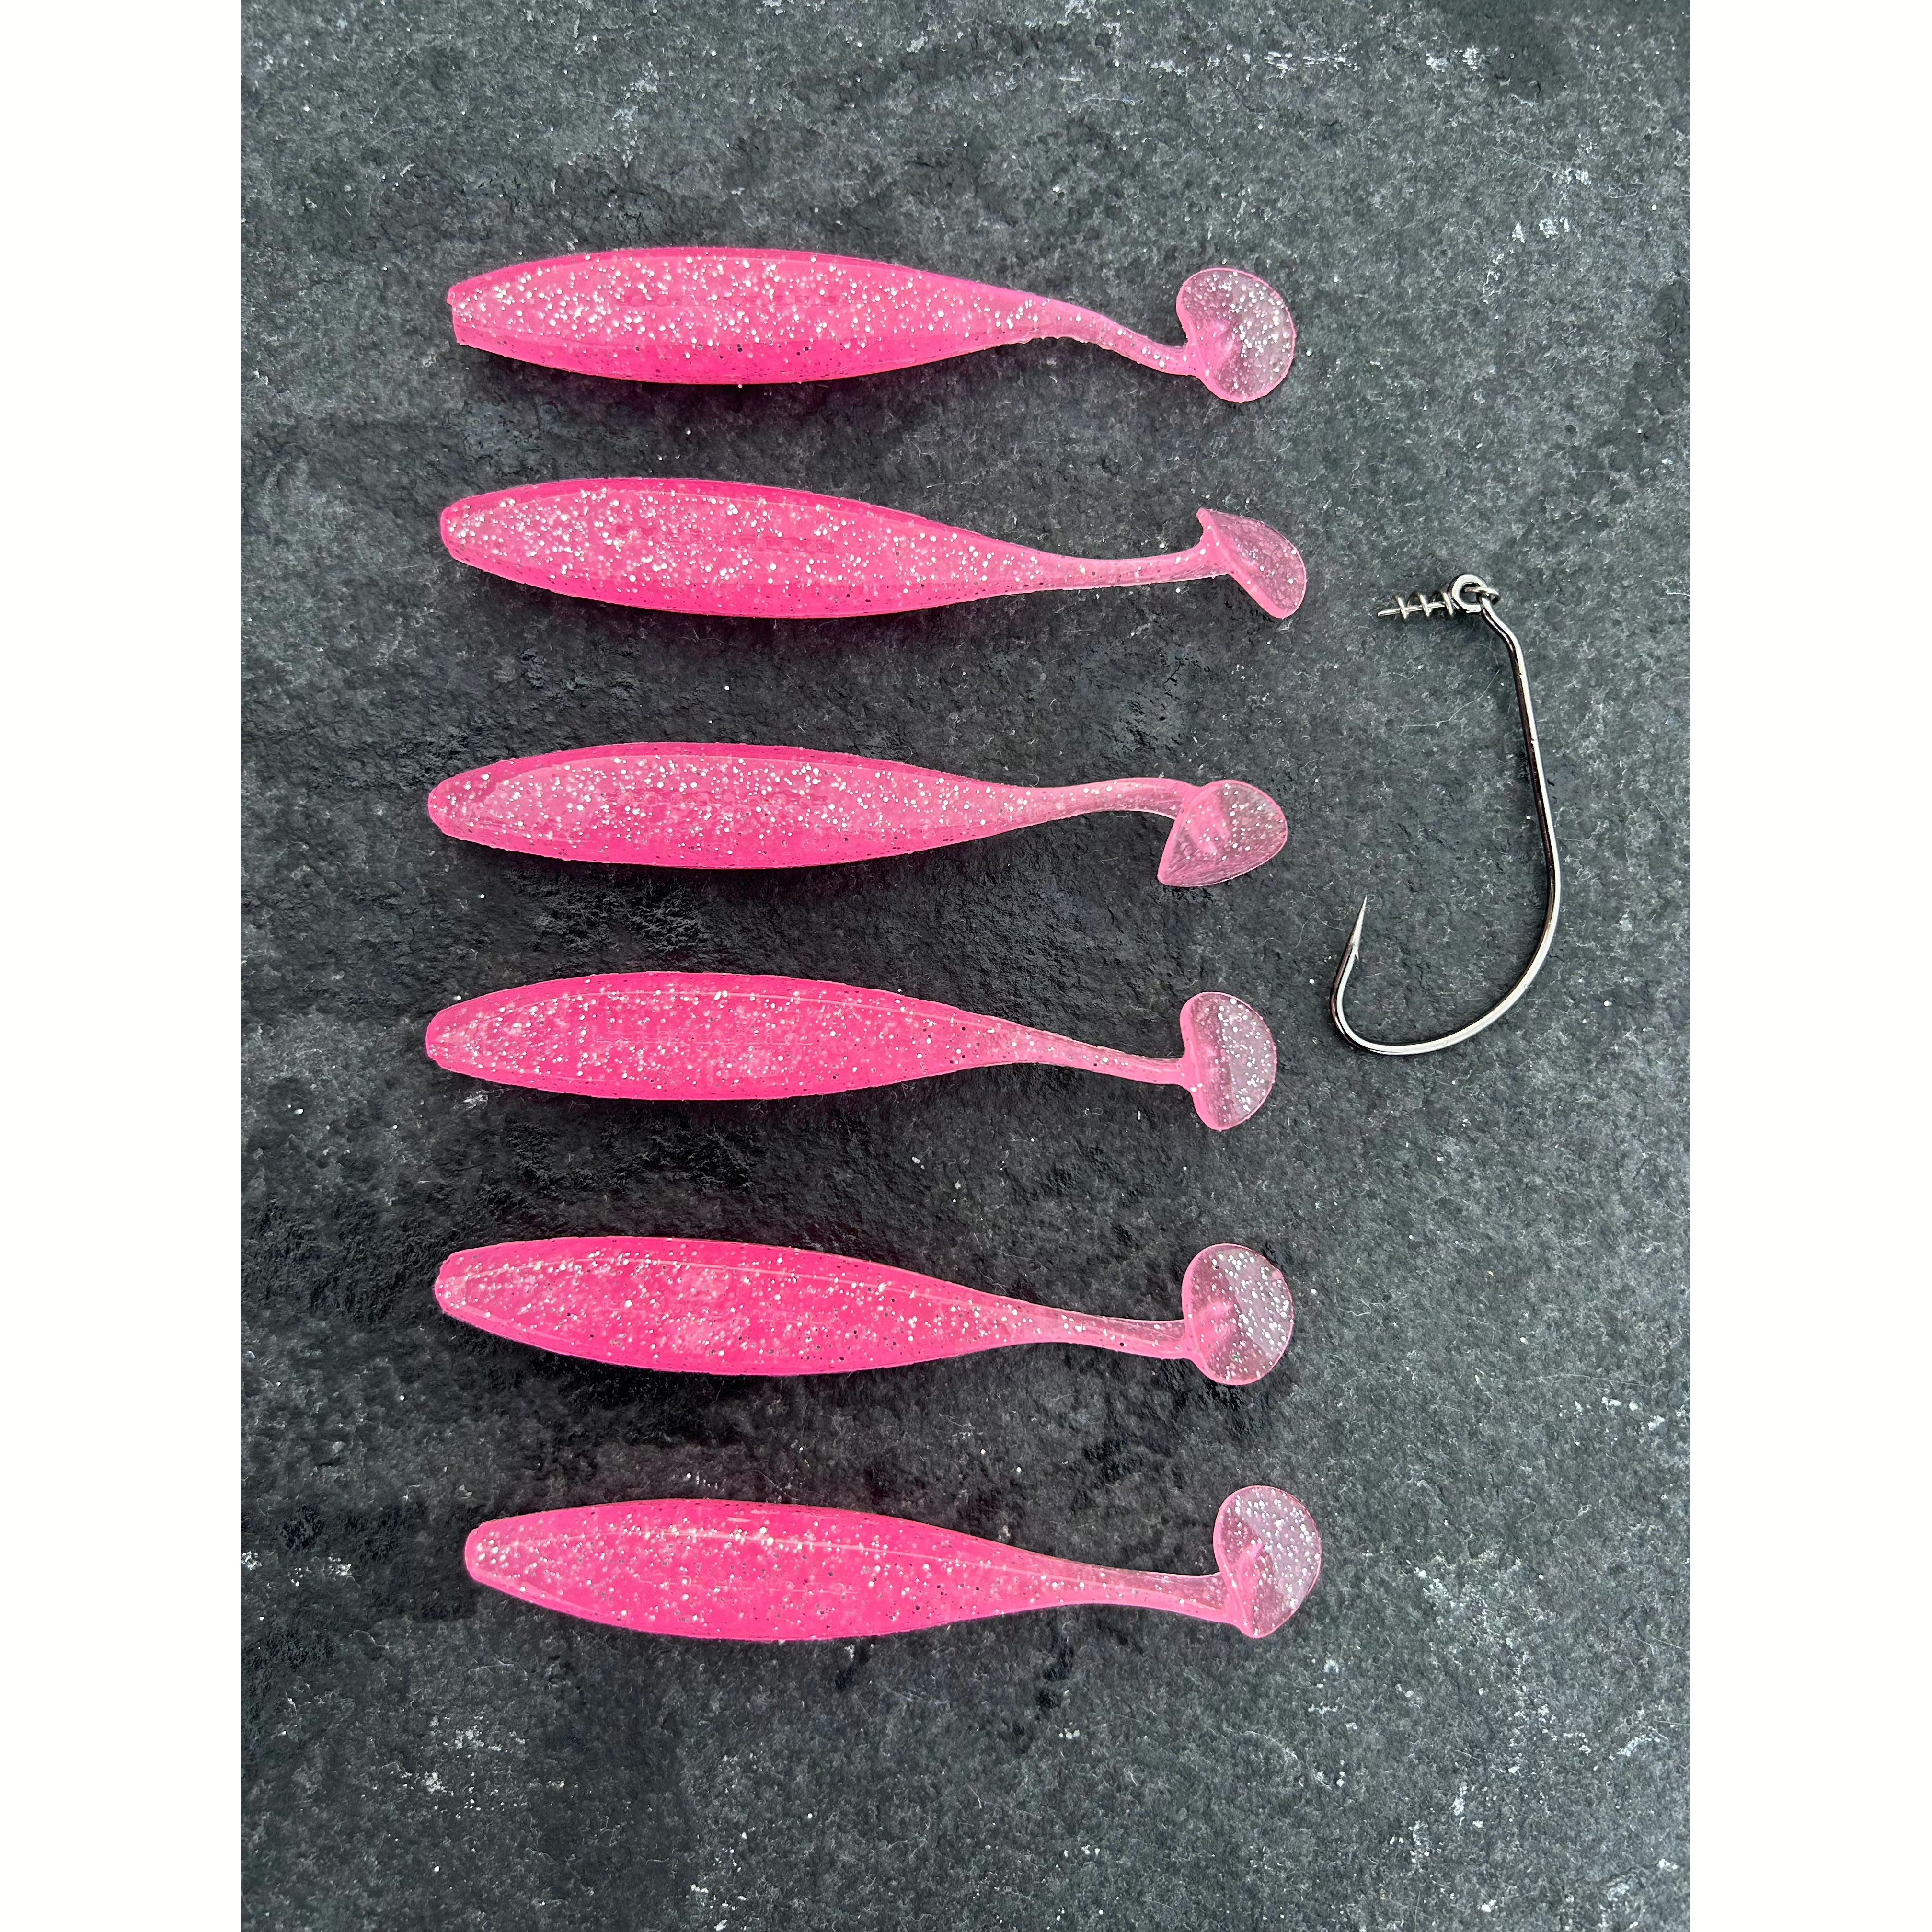 Small Weedless Shads 90mm 8g